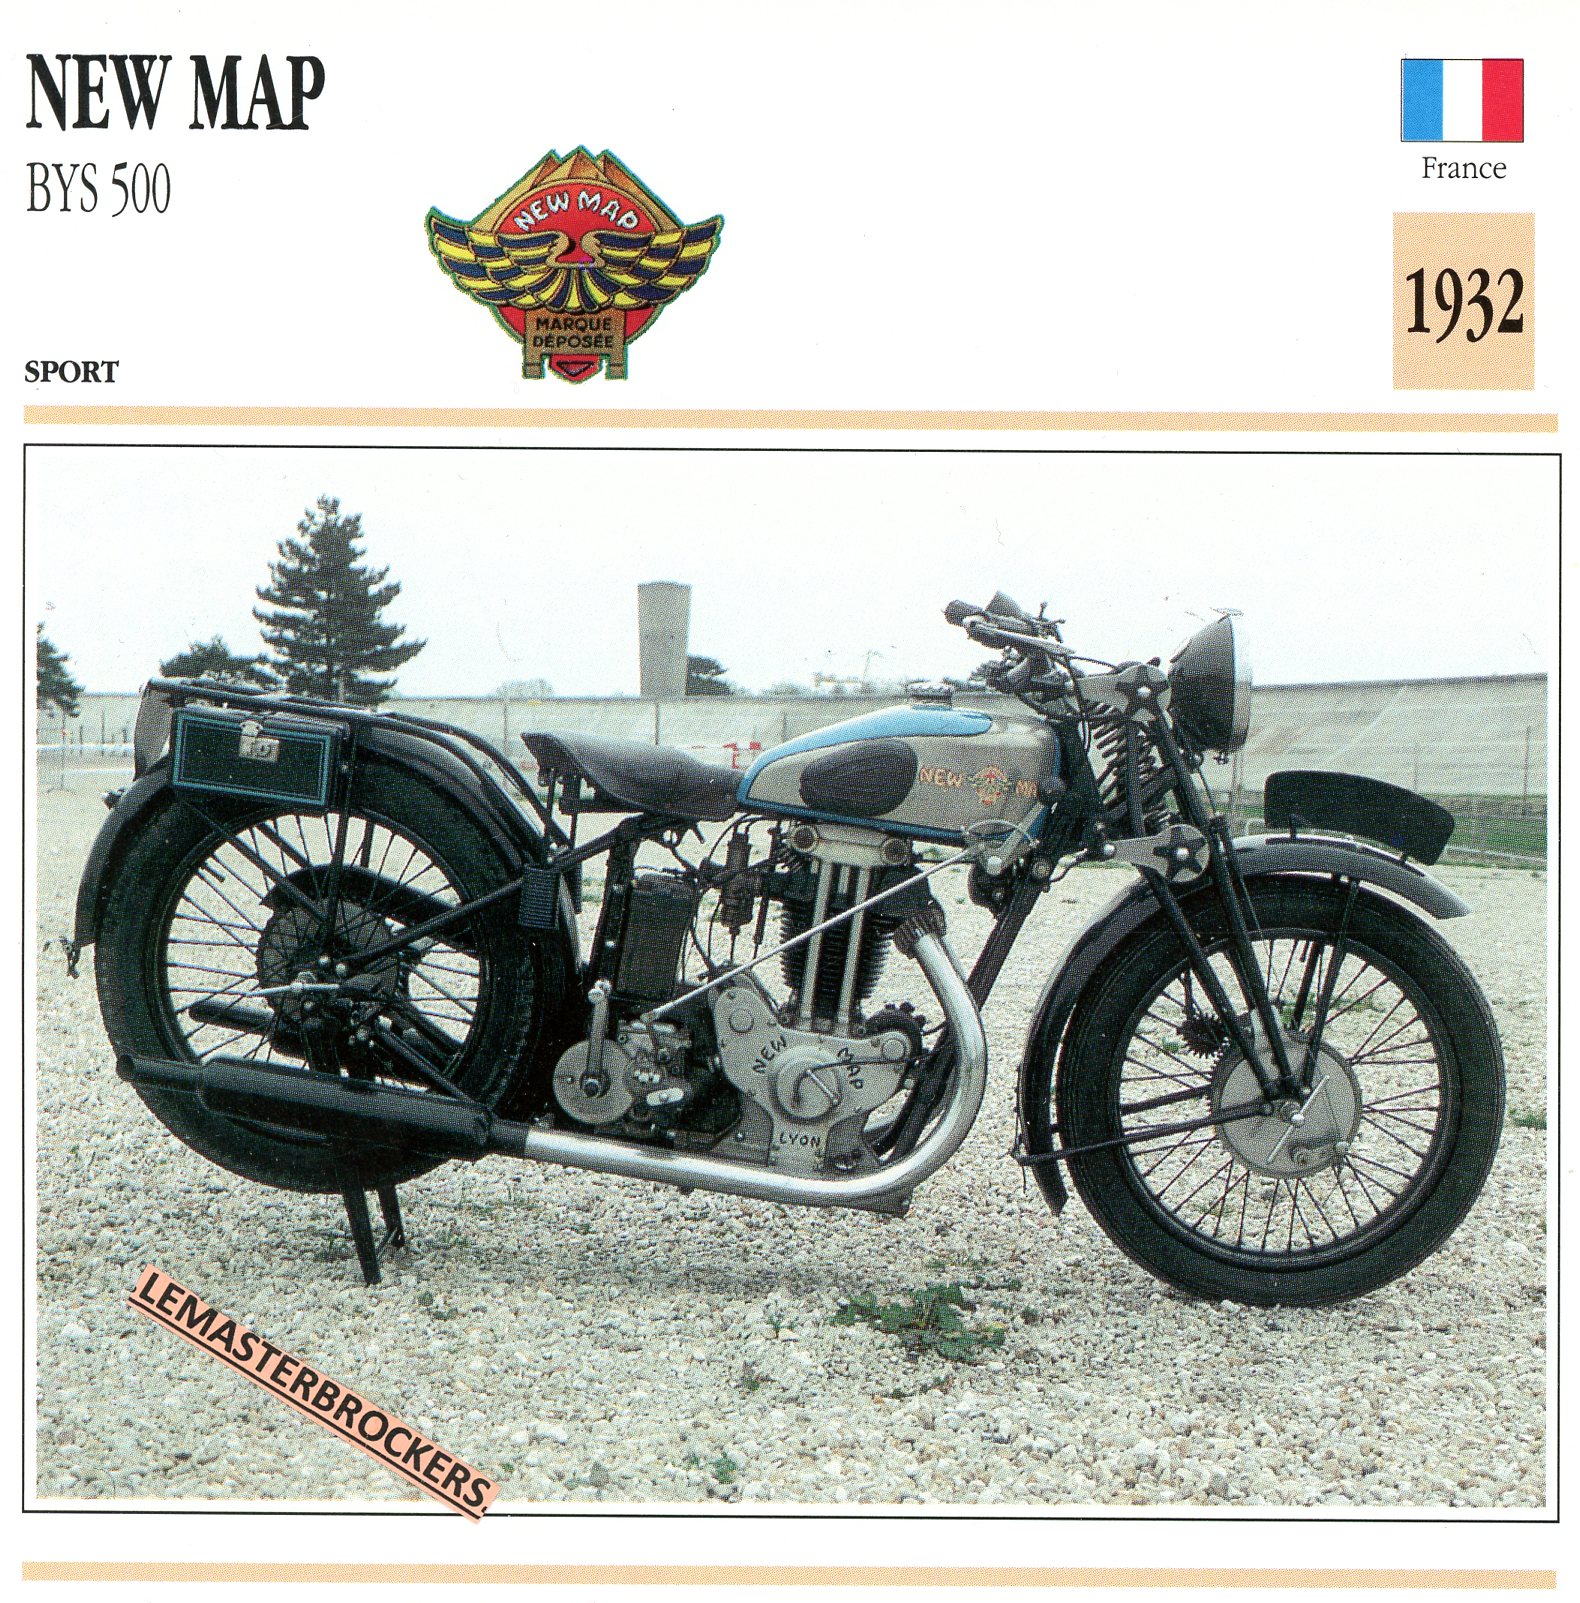 NEW-MPA-BYS-1932-NEWMAP-FICHE-MOTO-ATLAS-lemasterbrockers-CARD-MOTORCYCLE